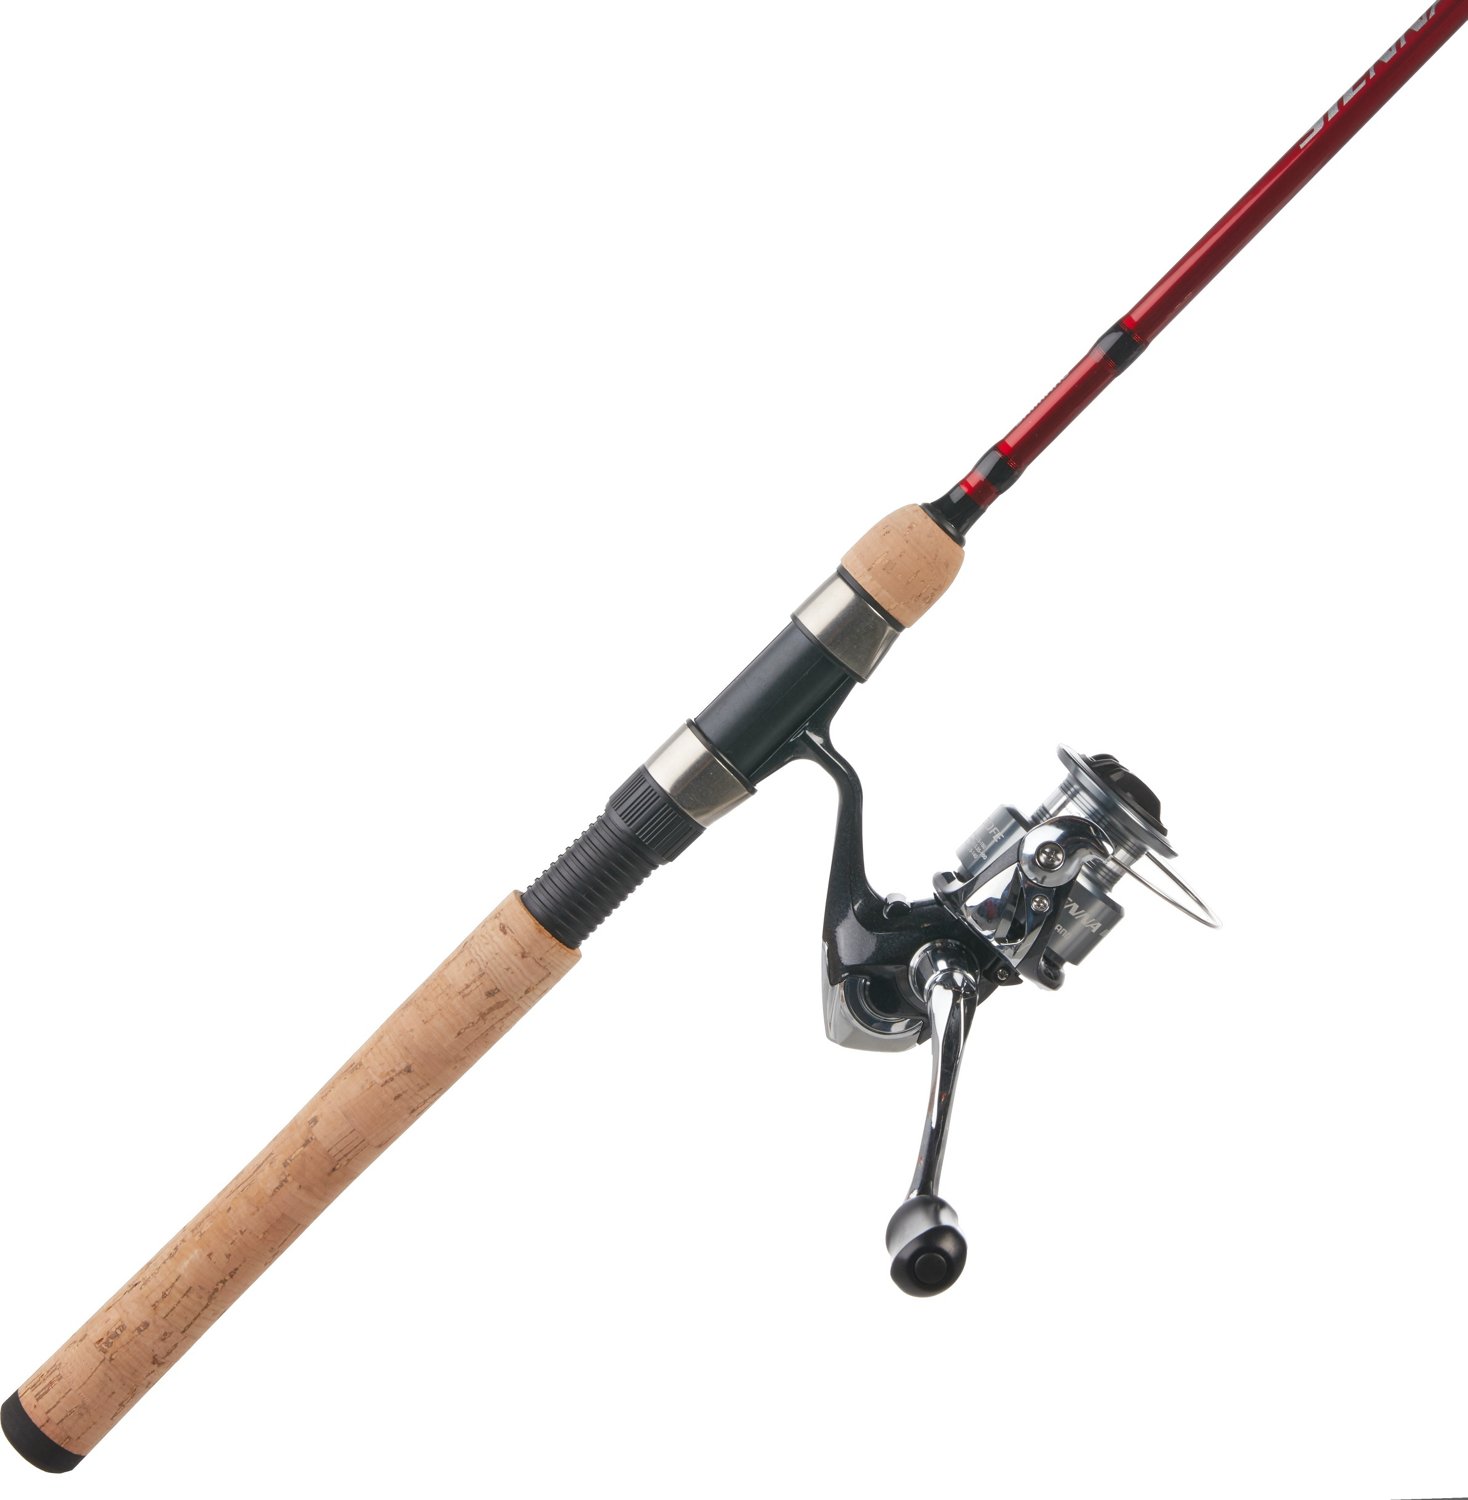 Academy Sports + Outdoors Shimano Sienna Freshwater Spinning Rod